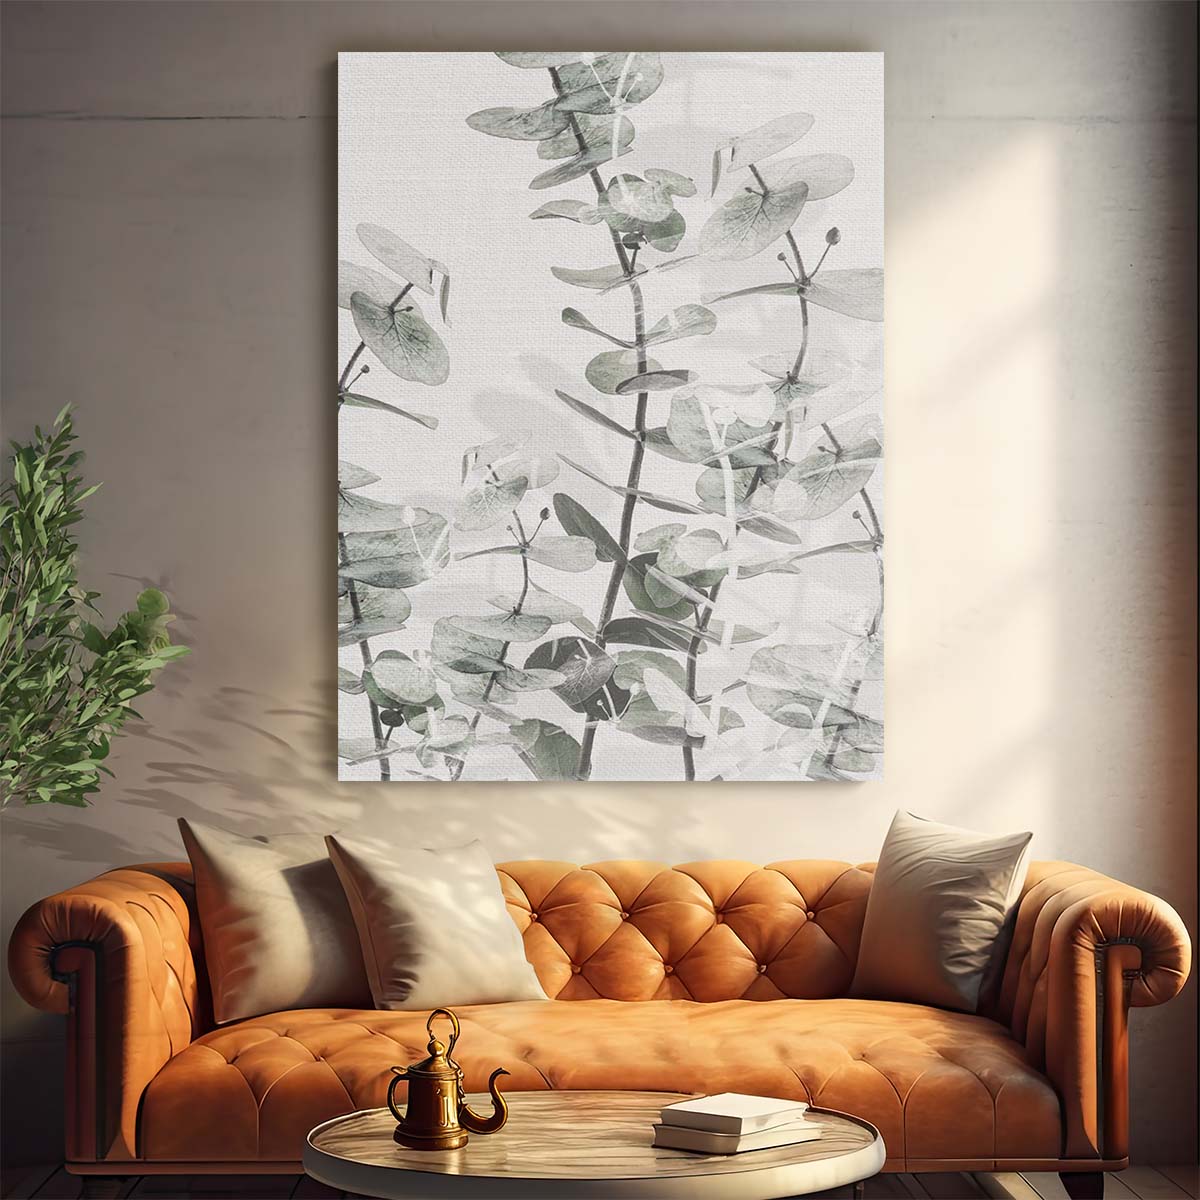 Botanical Abstract Photography - Eucalyptus Plant Leaves Art by Luxuriance Designs, made in USA